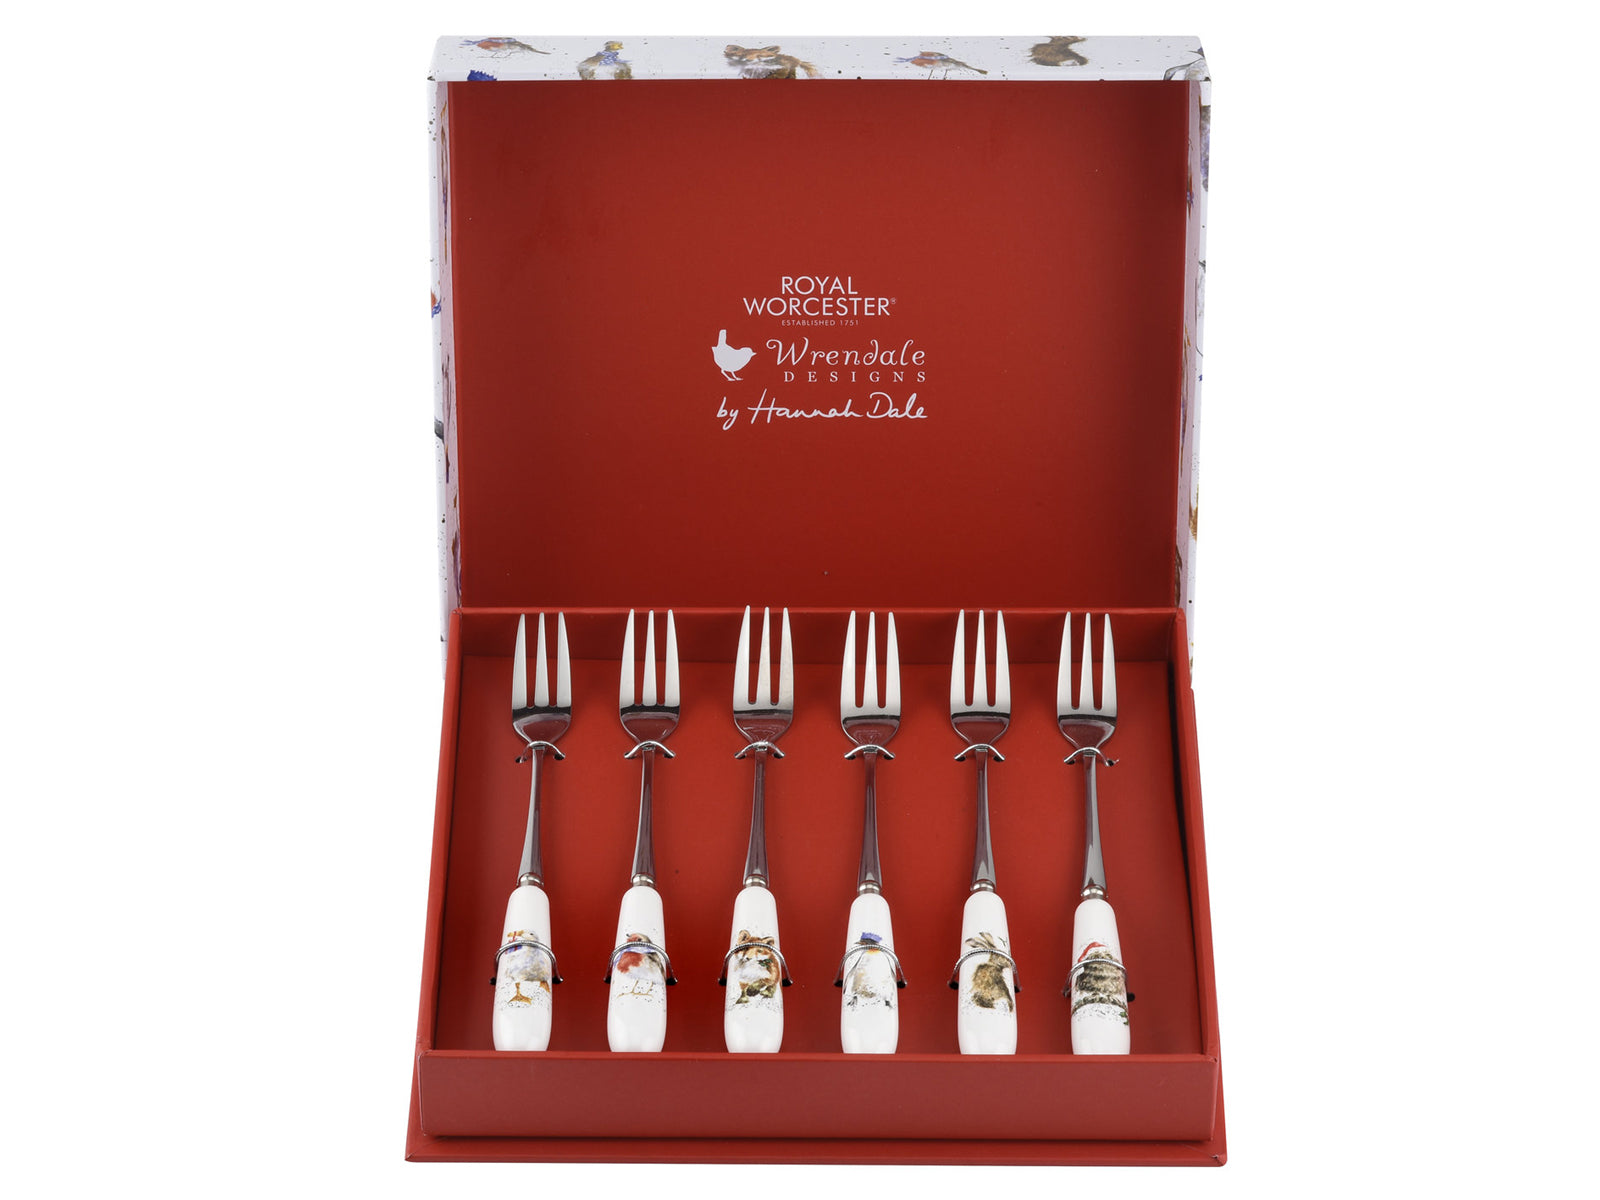 A set of six pastry forks with different animal designs on the handles, presented in a red box with a white lid which has more animal designs on it